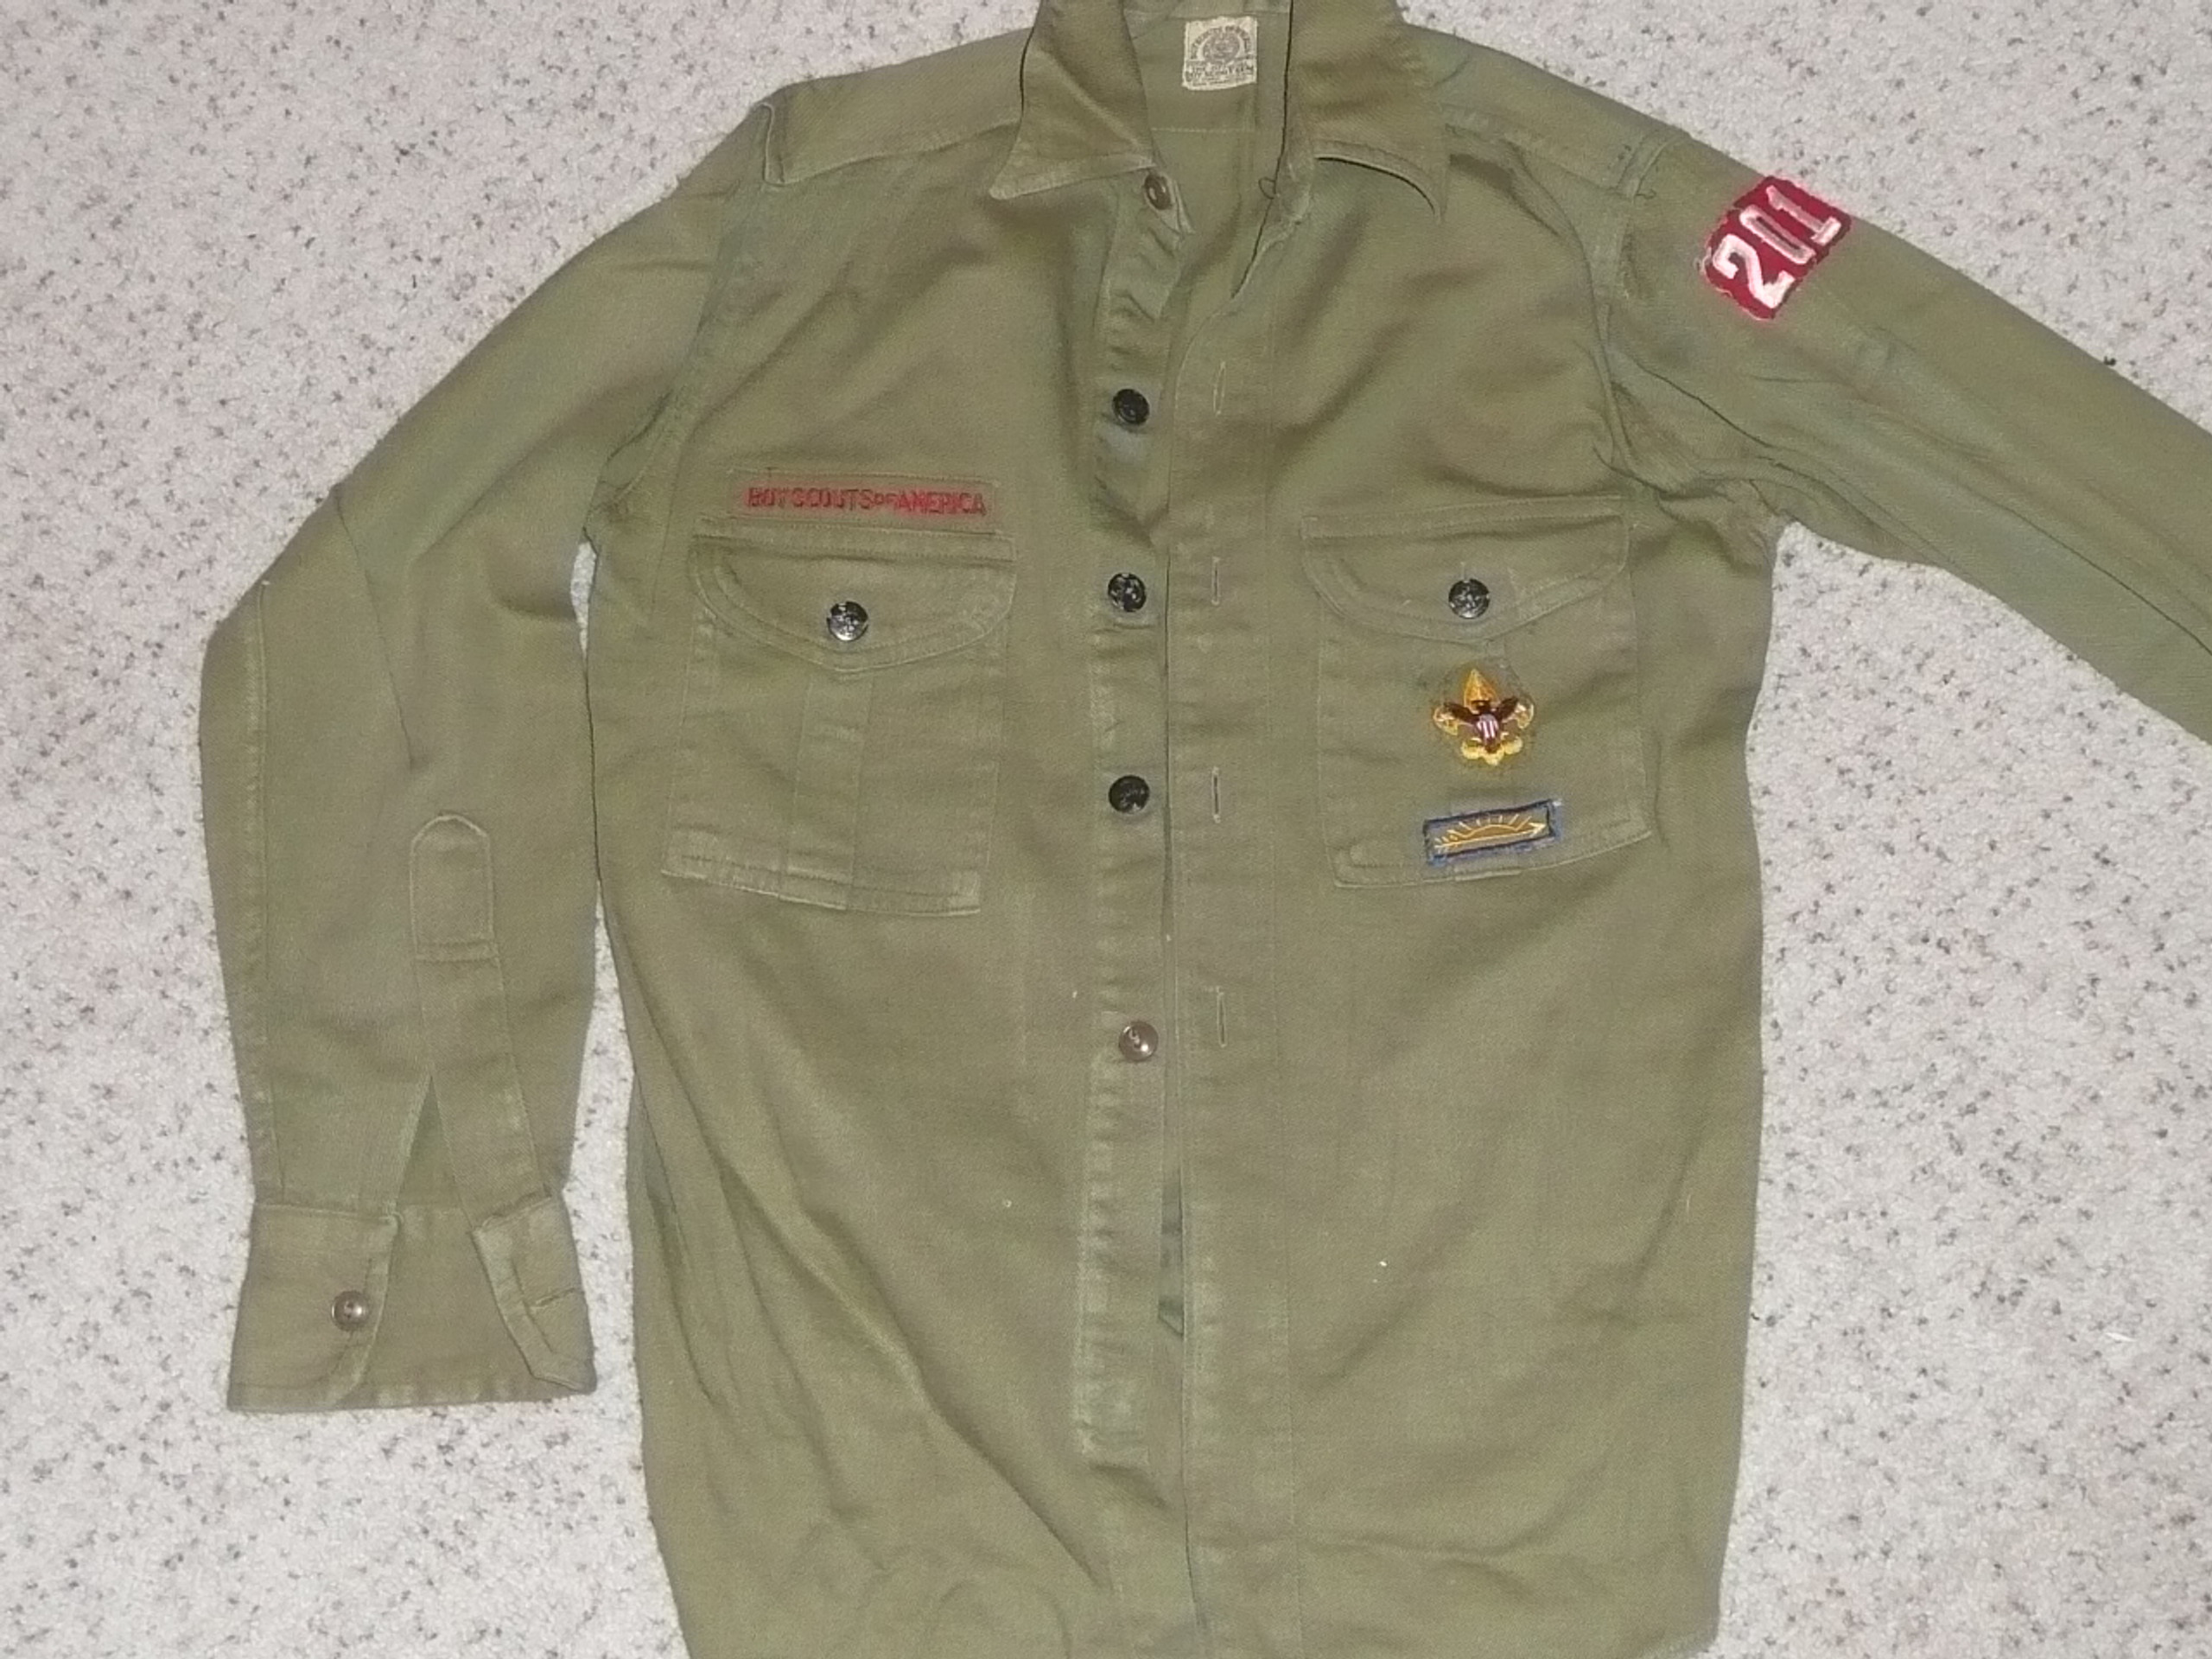 1950's Boy Scout Uniform Shirt with metal buttons and some insignia